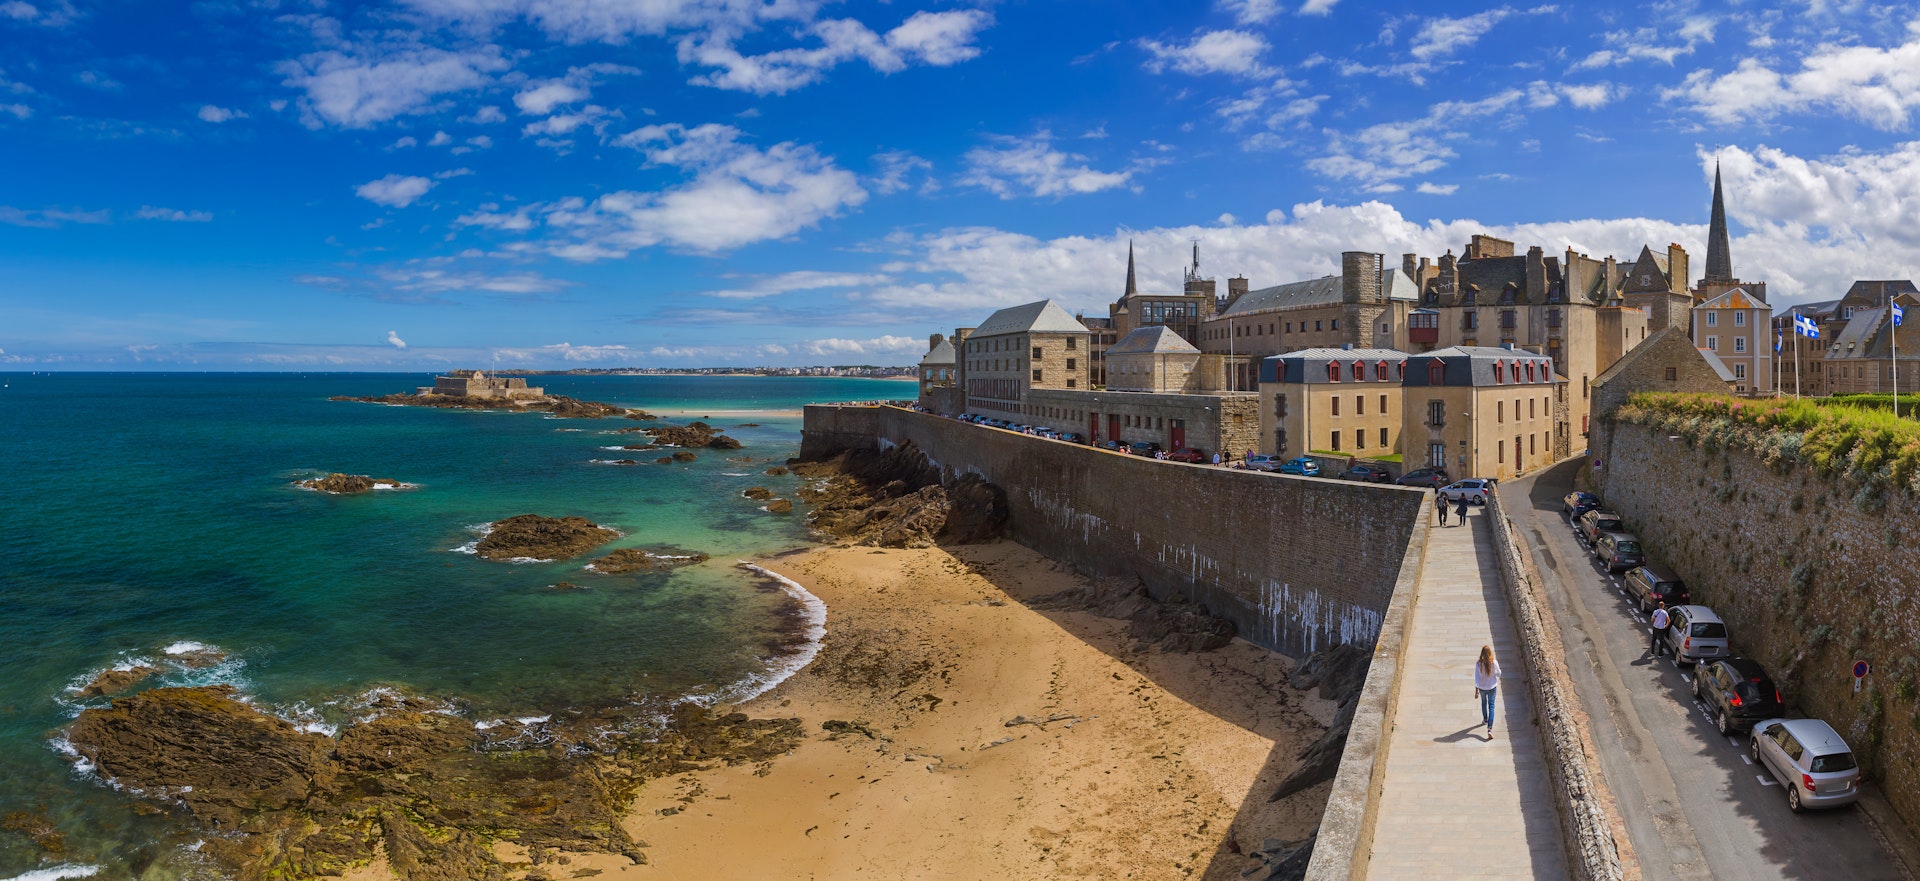 Panorama of a coastal area in Saint-Malo.... architecture, atlantic, beach, bretagne, brittany, buildings, castle, city, cityscape, coast, europe, exterior, fort, fortress, france, heritage, high, historic, history, house, island, landmark, landscape, low, malo, medieval, nature, normandy, ocean, old, outdoor, panorama, rock, saint, saint-malo, sea, sightseeing, sky, st, stone, summer, sun, tide, tourism, tower, town, travel, wall, water